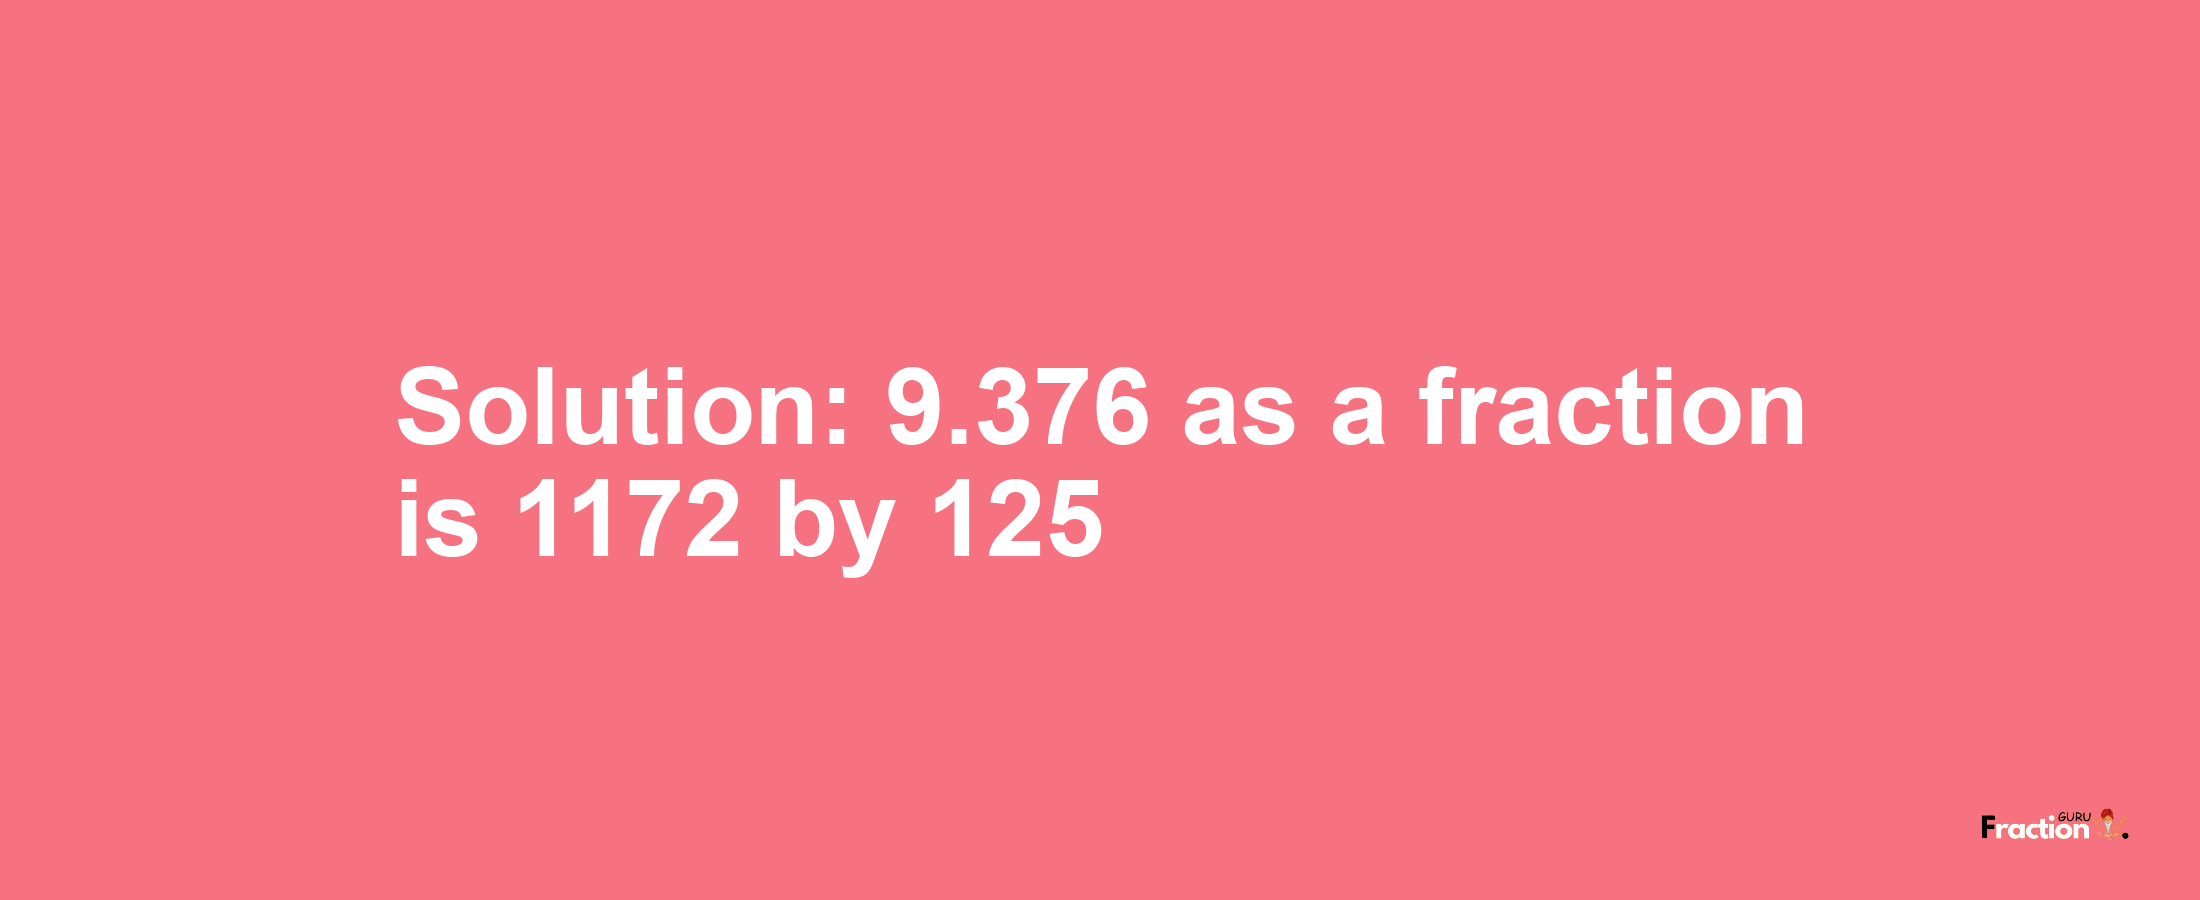 Solution:9.376 as a fraction is 1172/125